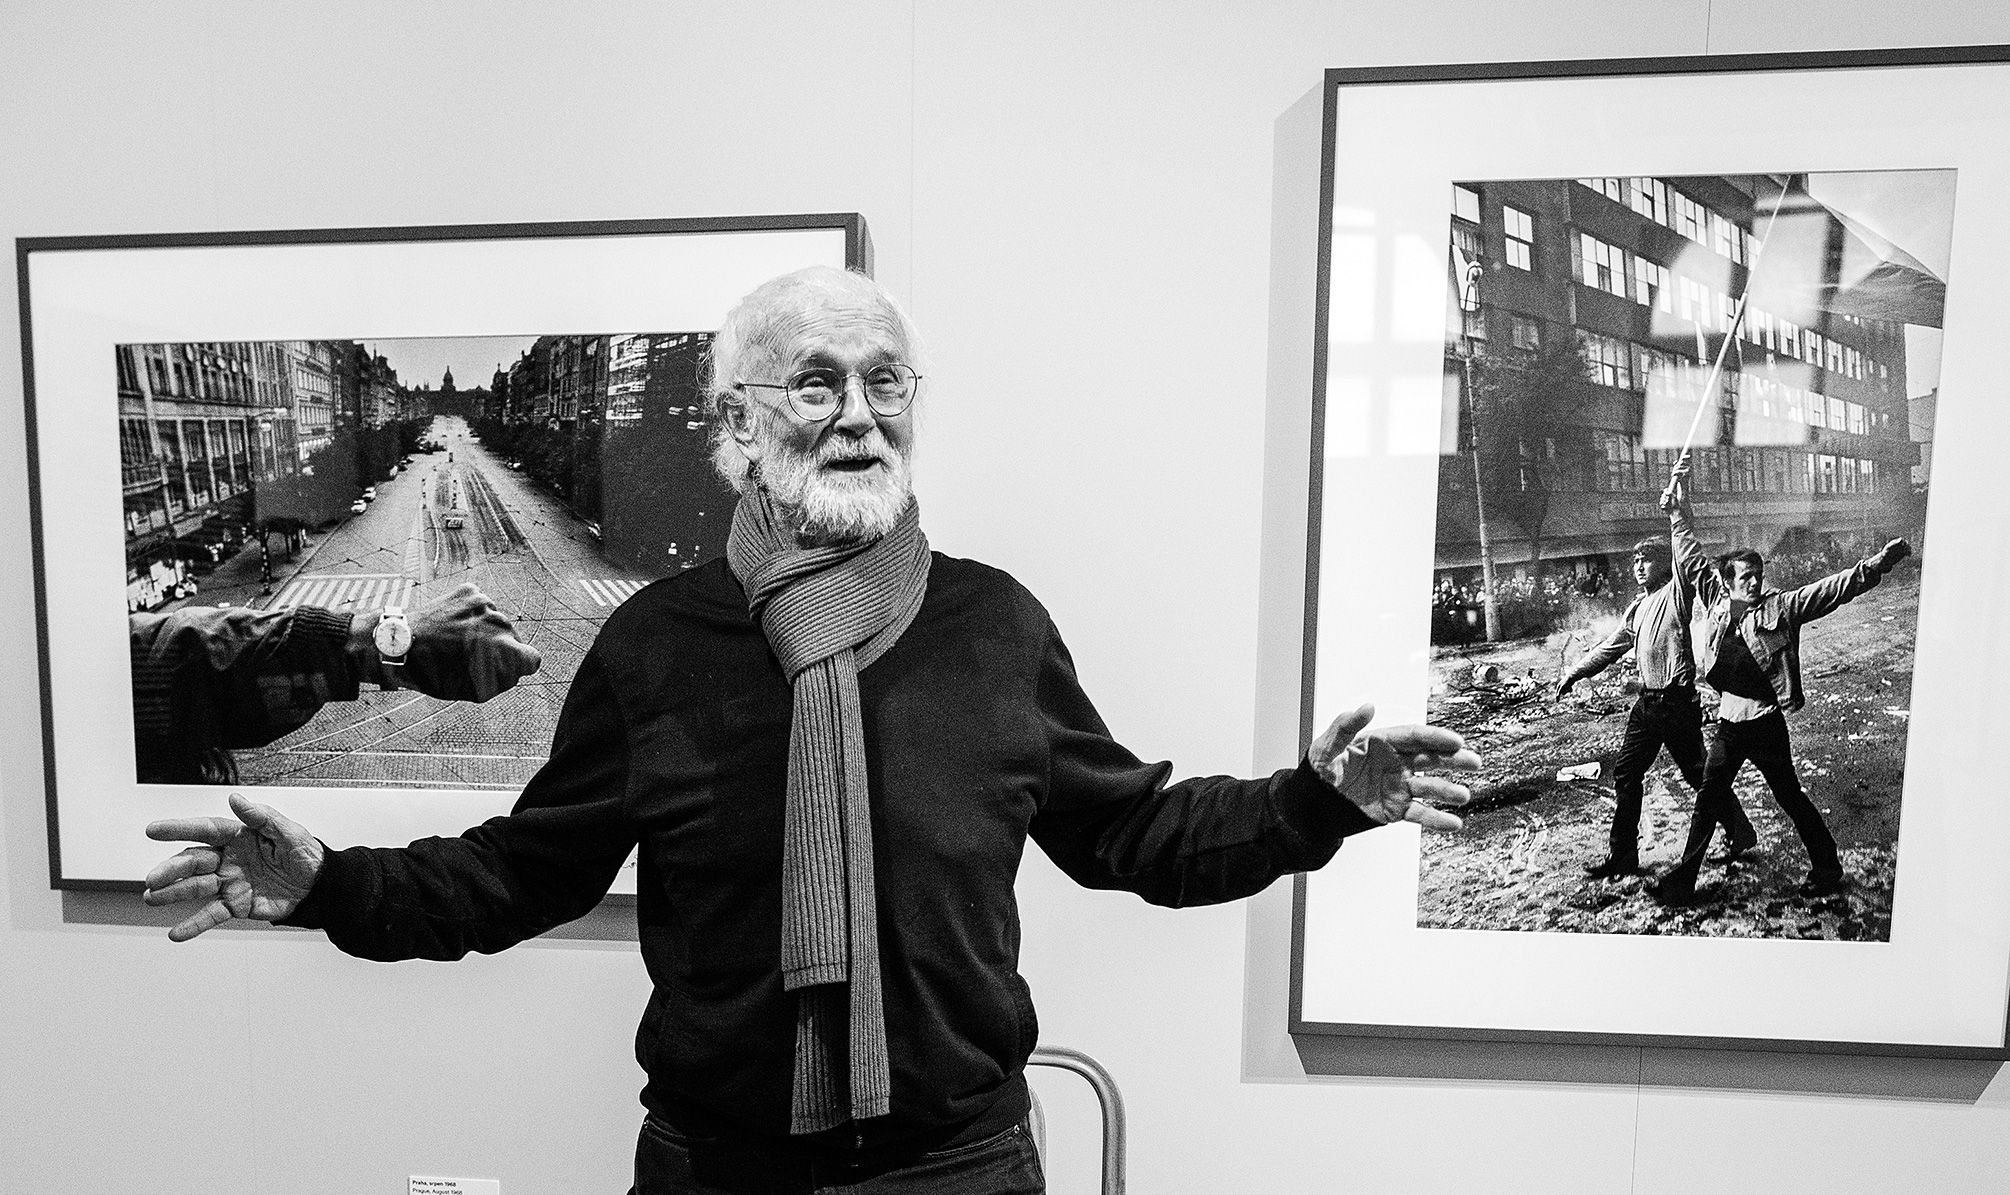 Life on the road, the magic of photography and the home within you.  Josef Koudelka celebrates 85 years